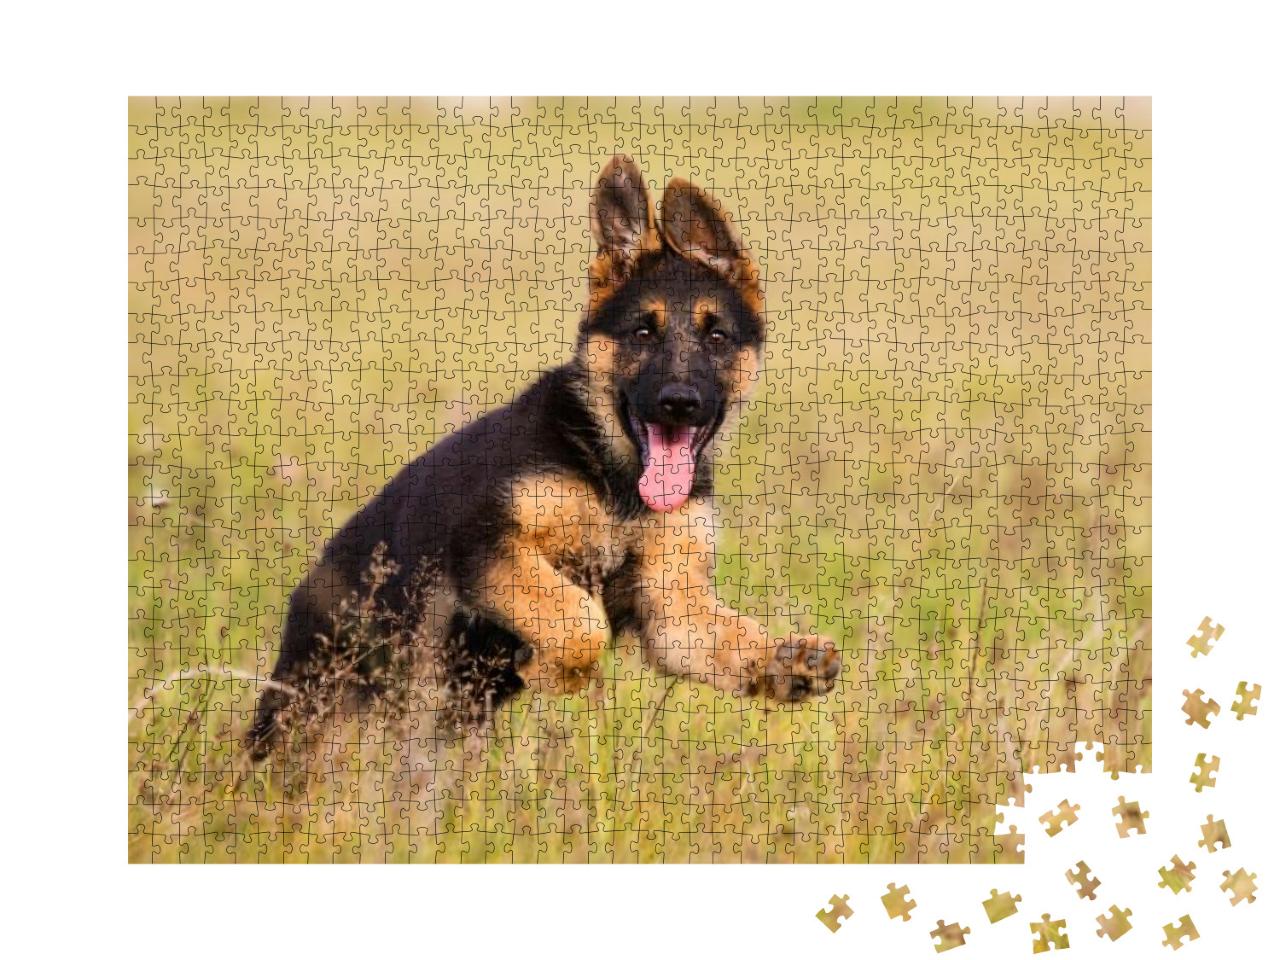 German Shepherd Puppy Runs on the Grass... Jigsaw Puzzle with 1000 pieces